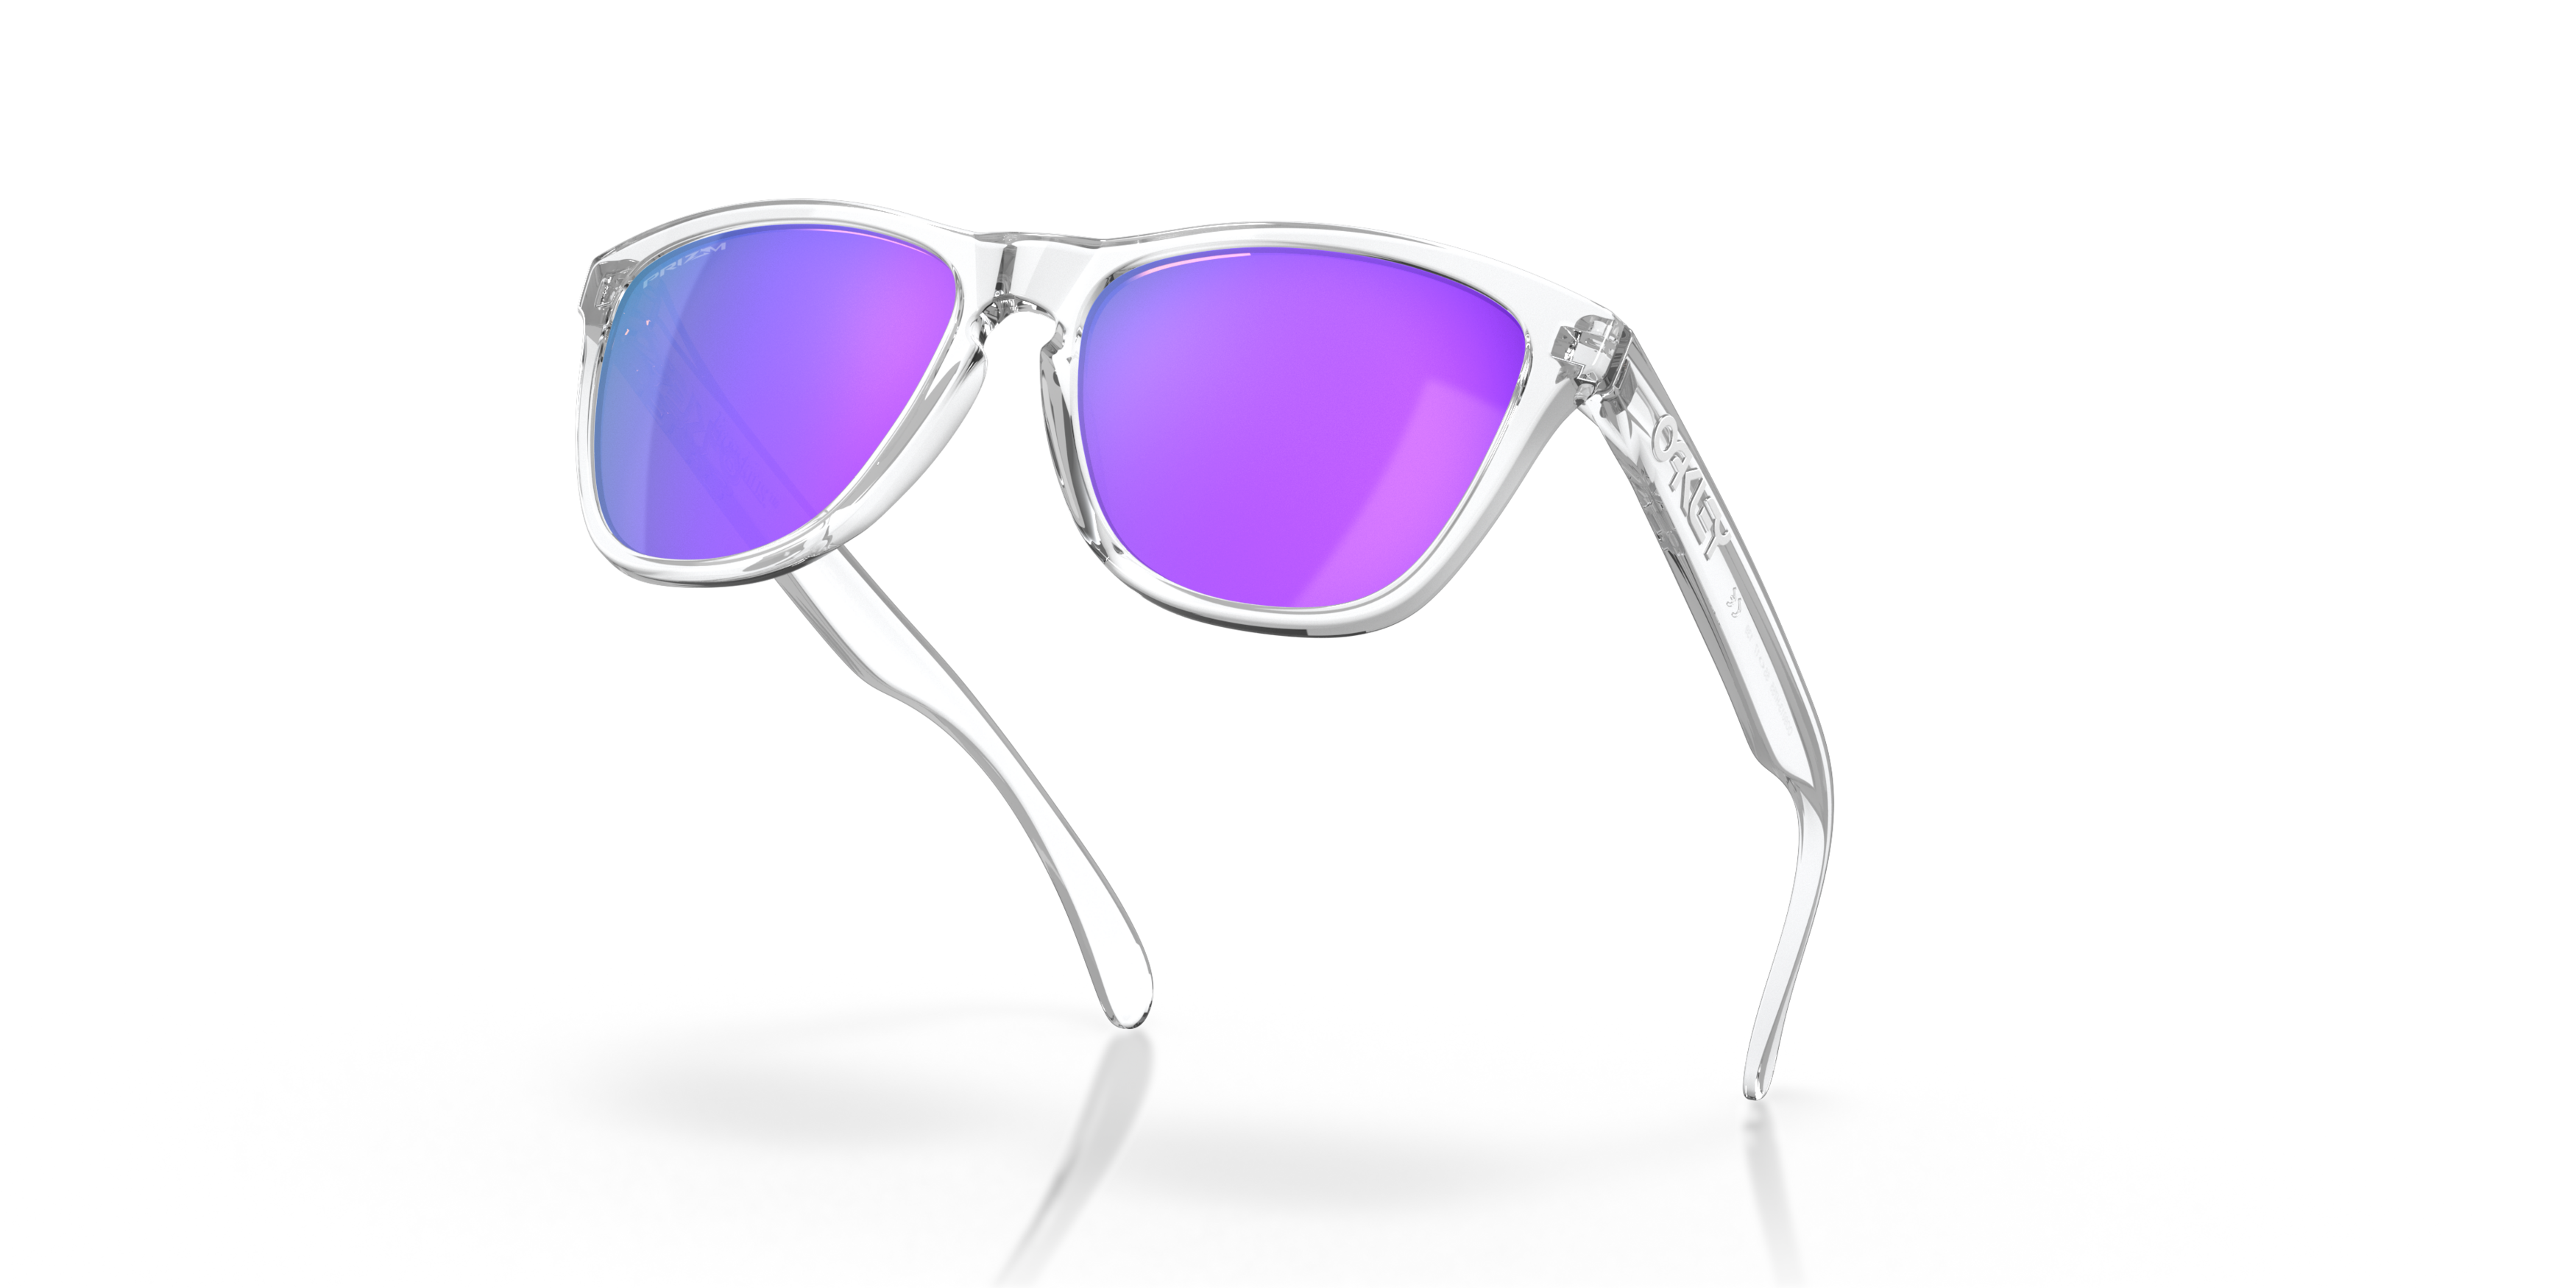 [products.image.bottom_up] Oakley Frogskins OO9013 9013H7